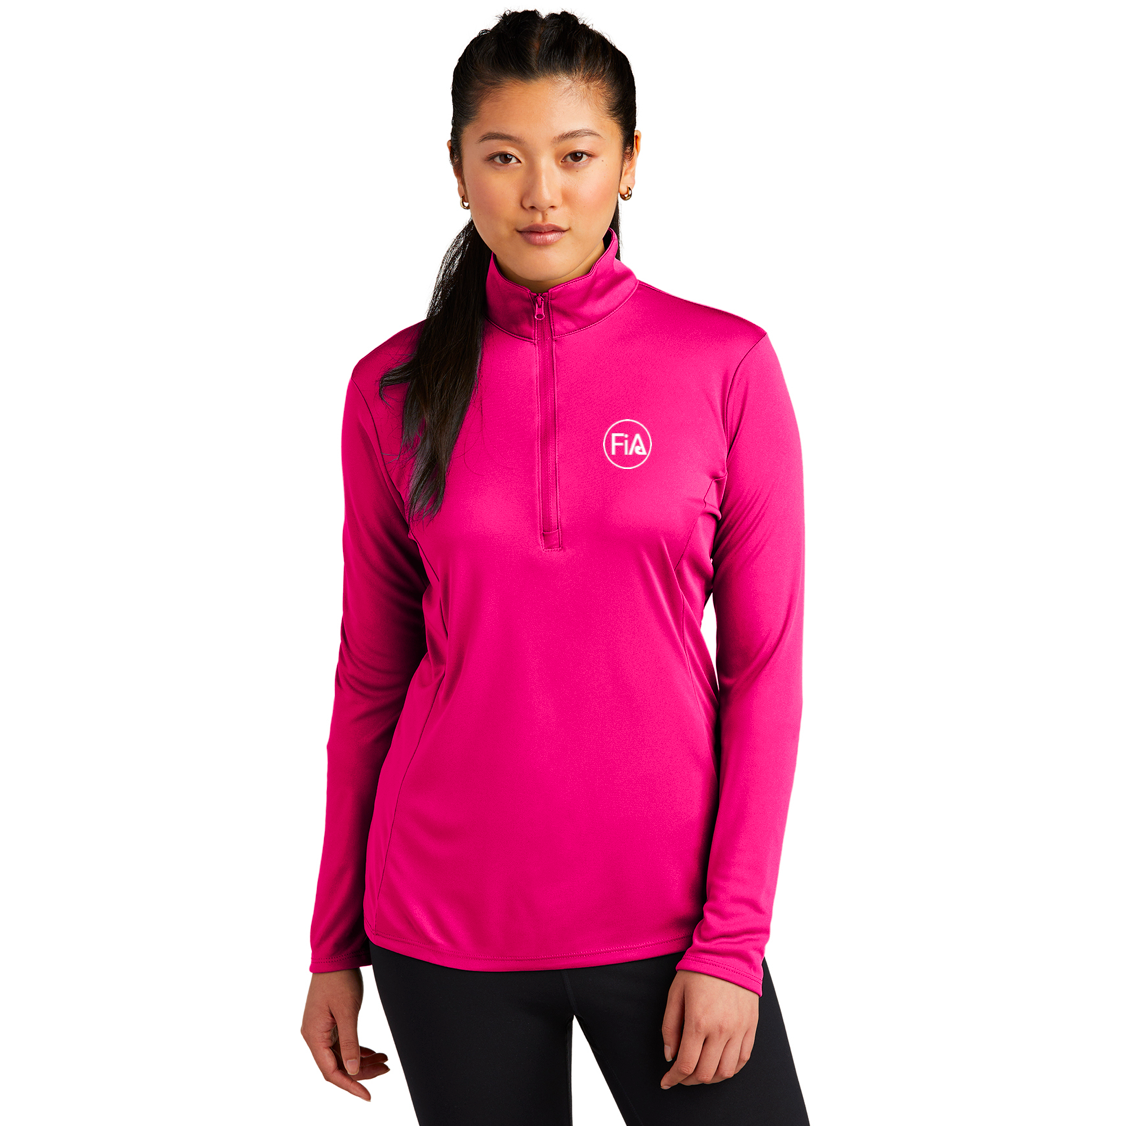 FiA Sport-Tek Ladies PosiCharge Competitor 1/4-Zip Pullover - Made to Order